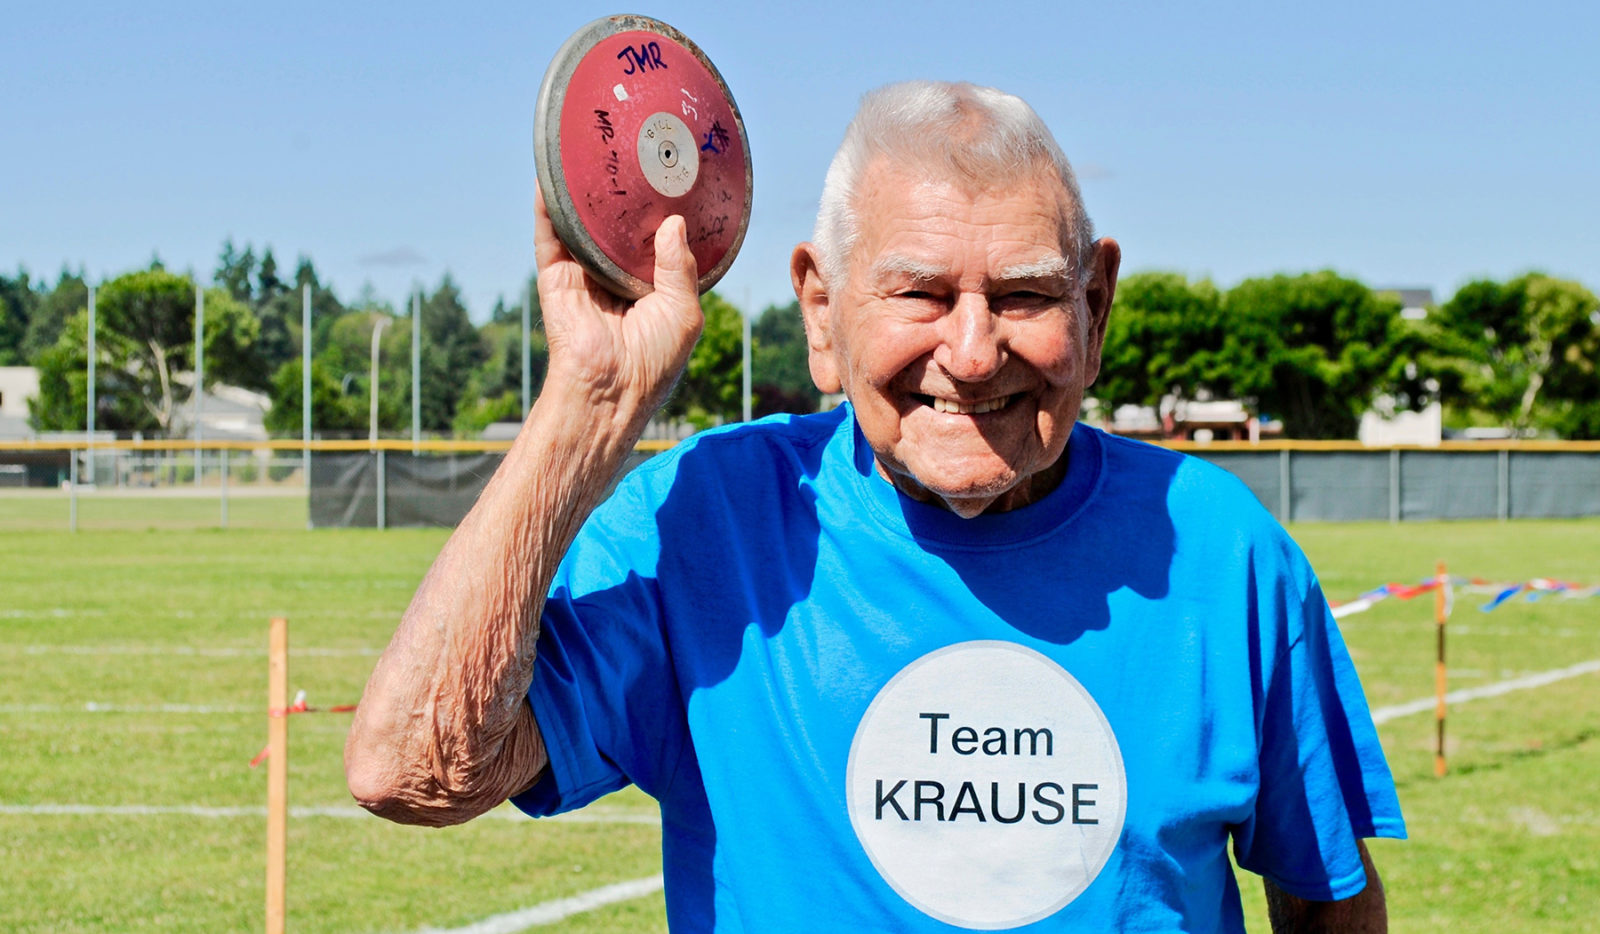 Senior Games competitor Leonard Krause in 2021 (age 100), holding a discus over his head